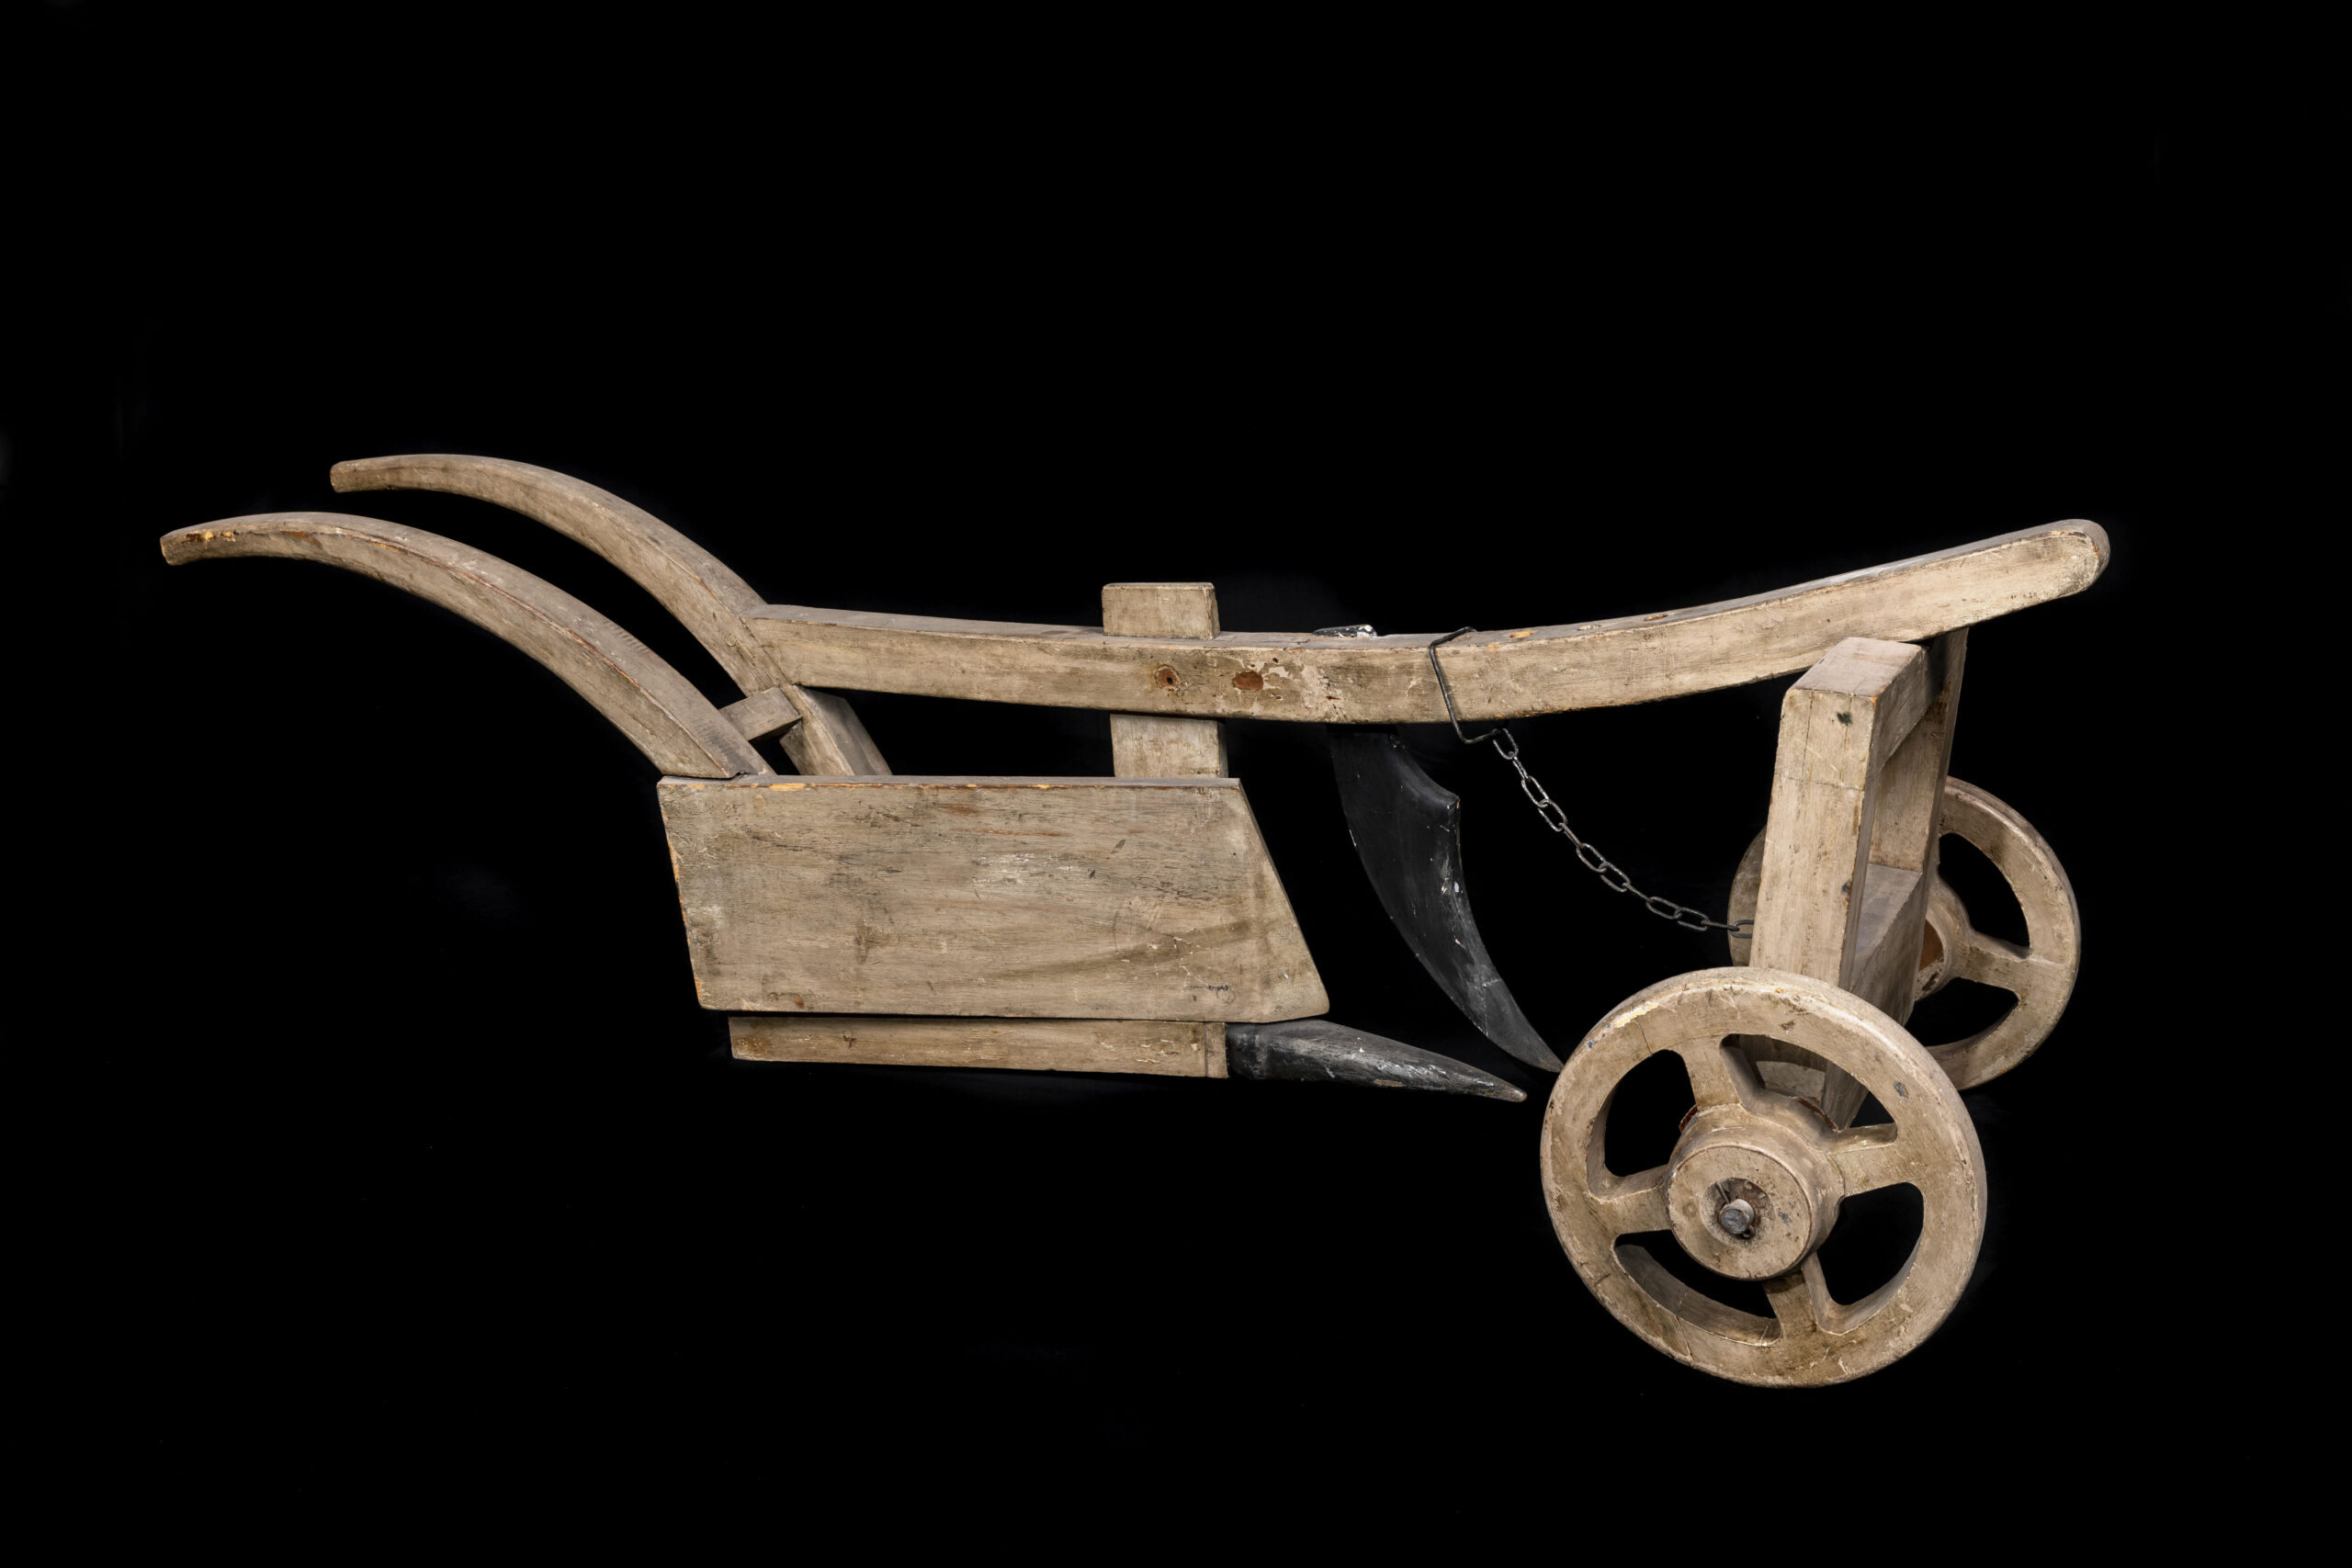 This scale model of a seventeenth century plough was first displayed at the Festival of Britain in 1951, and later used on the Museum’s trade stand at the Royal Agricultural Show in 1952 (MERL 52/68).